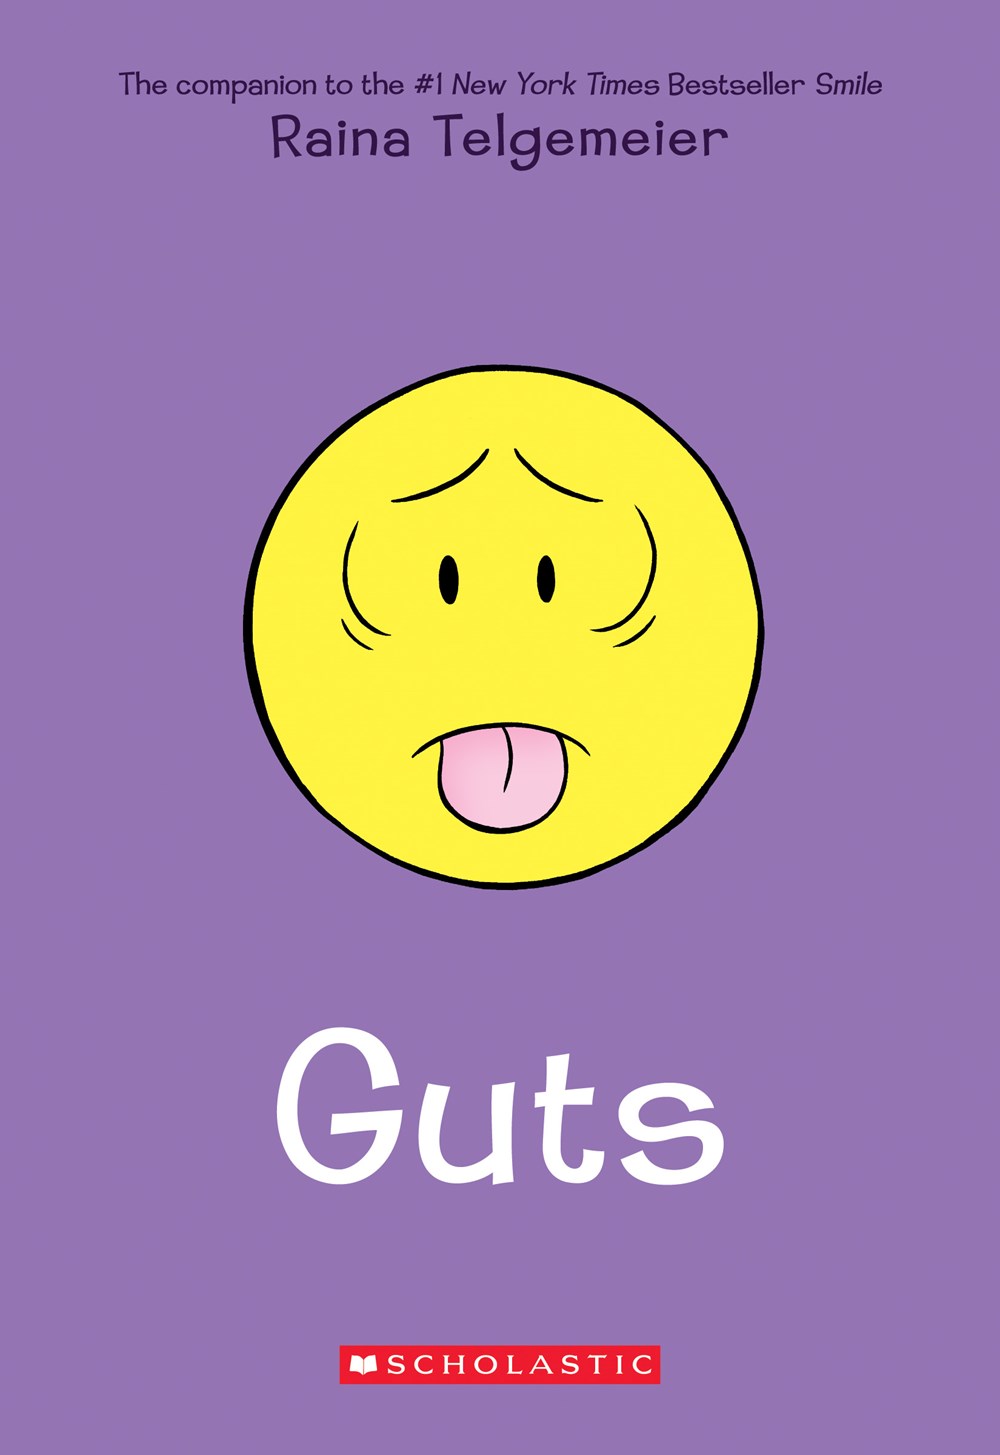 Review of Guts